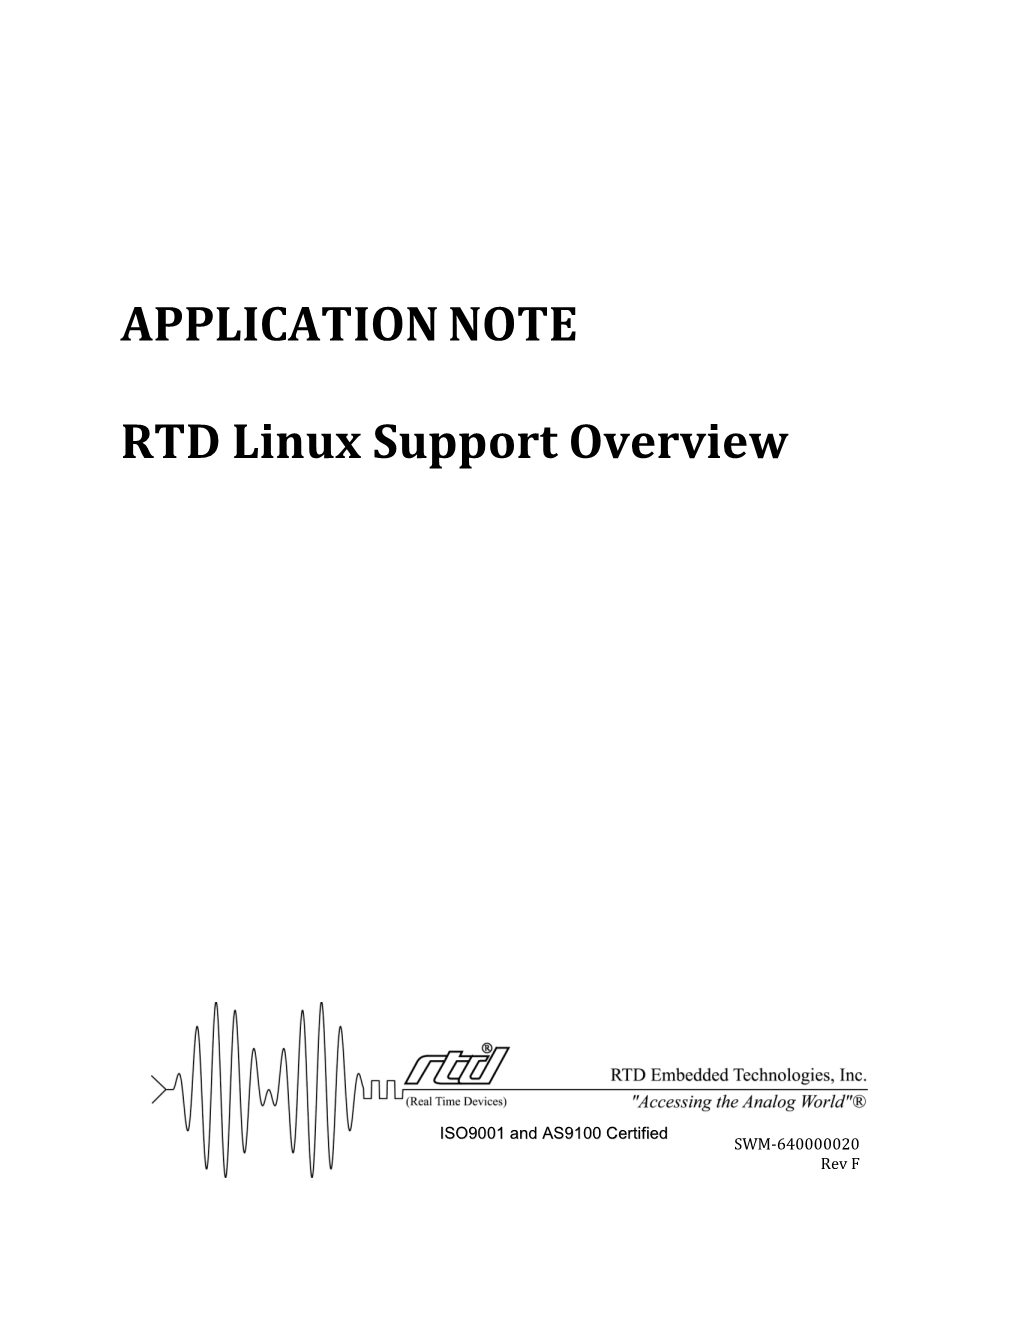 RTD Linux Support Overview